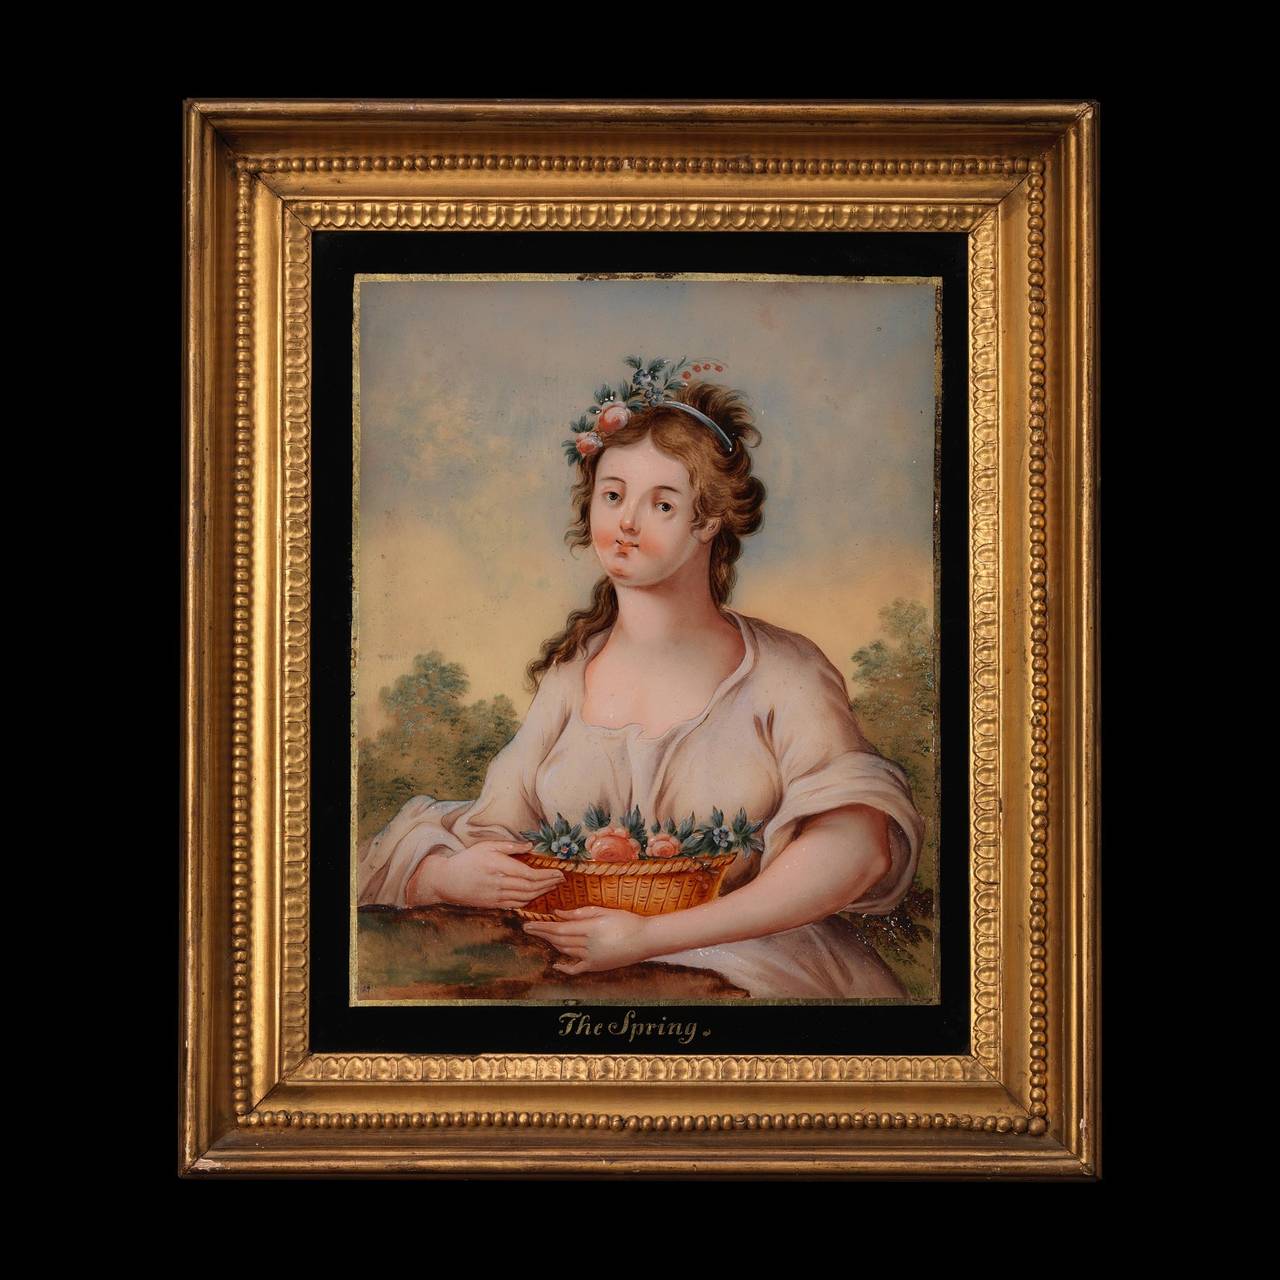 These are a wonderful and rare find of immense beauty. The set of four reverse painted glass pictures are in exceptionally fine, clean and original condition. They retain their original Regency frames with gold leaf water gilded finish.

It is